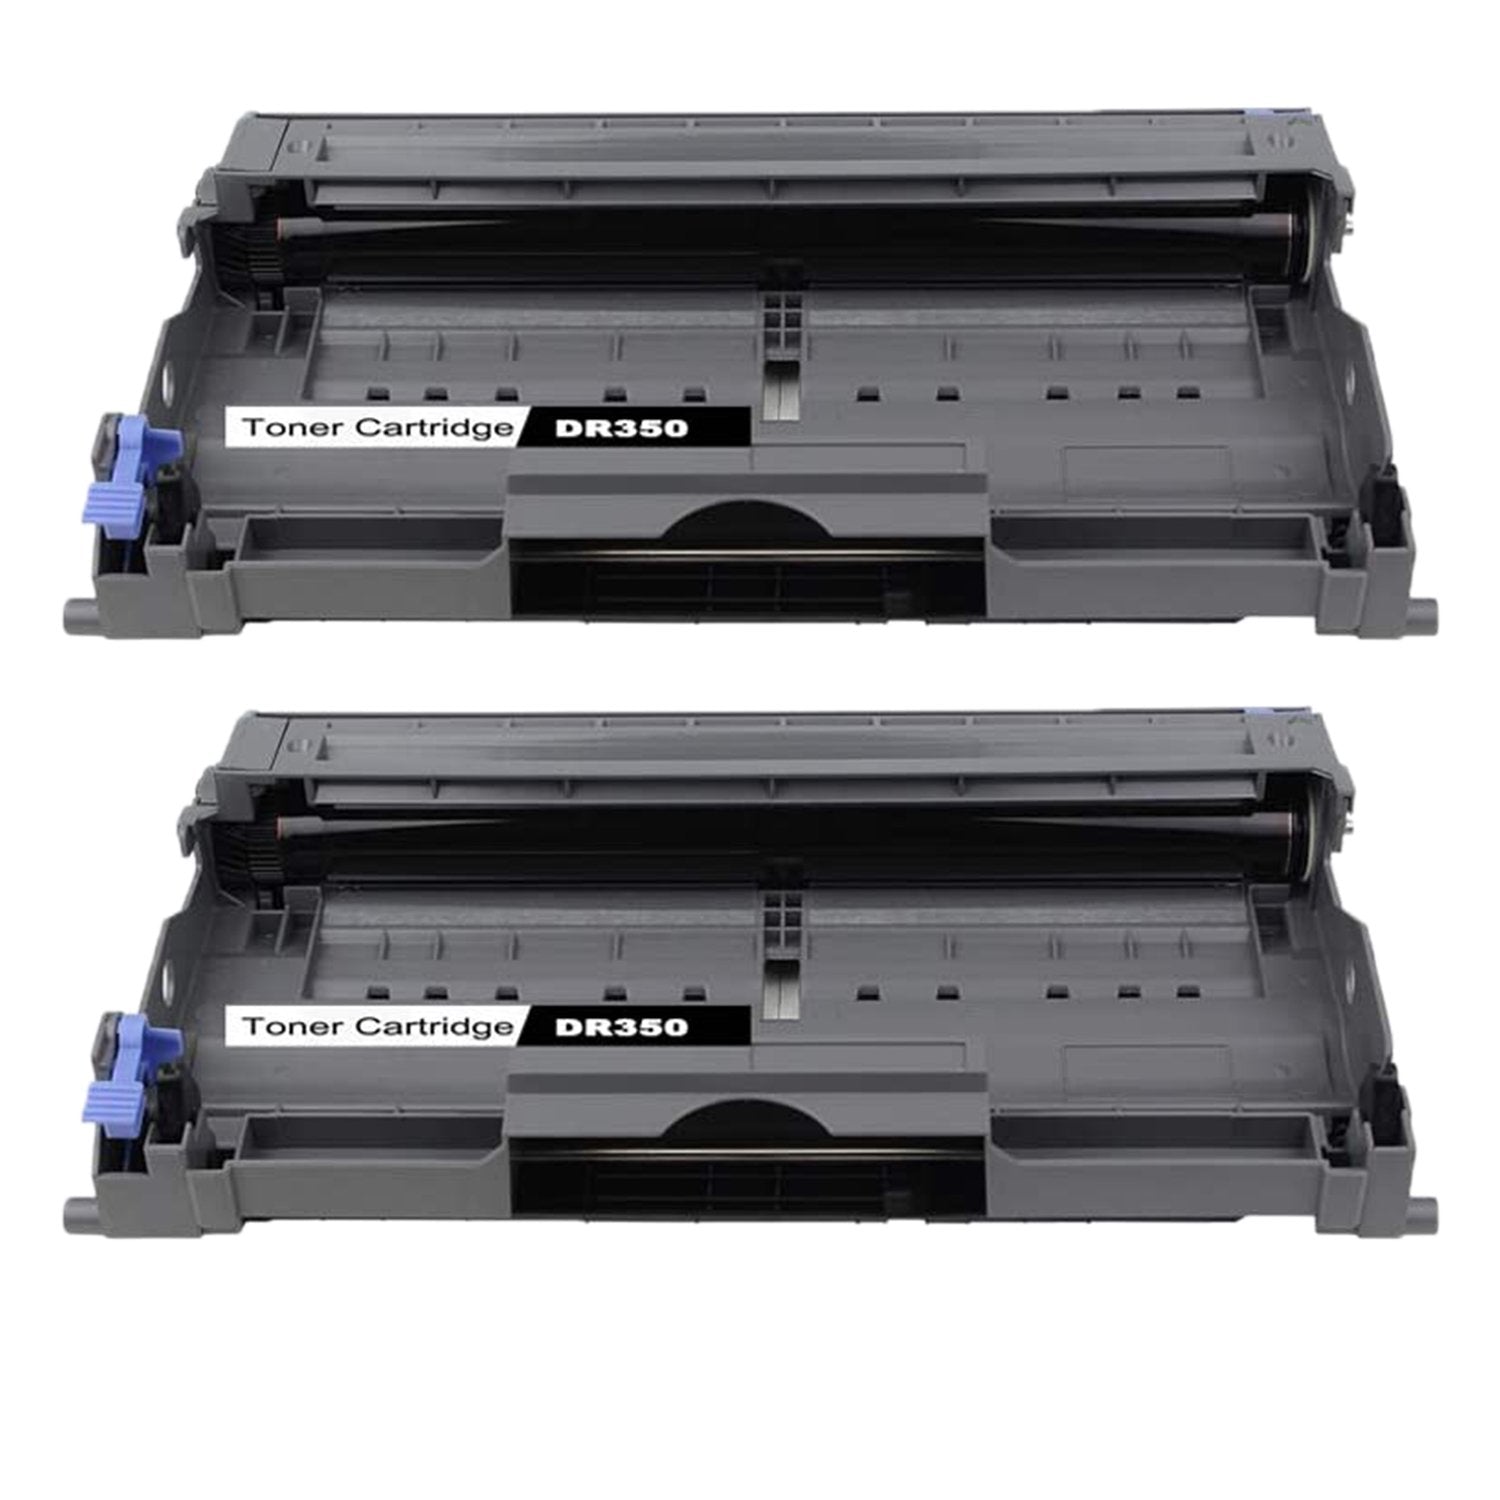 Absolute Toner Compatible Brother DR350 Black Drum Unit Toner Cartridge | Absolute Toner Brother Toner Cartridges